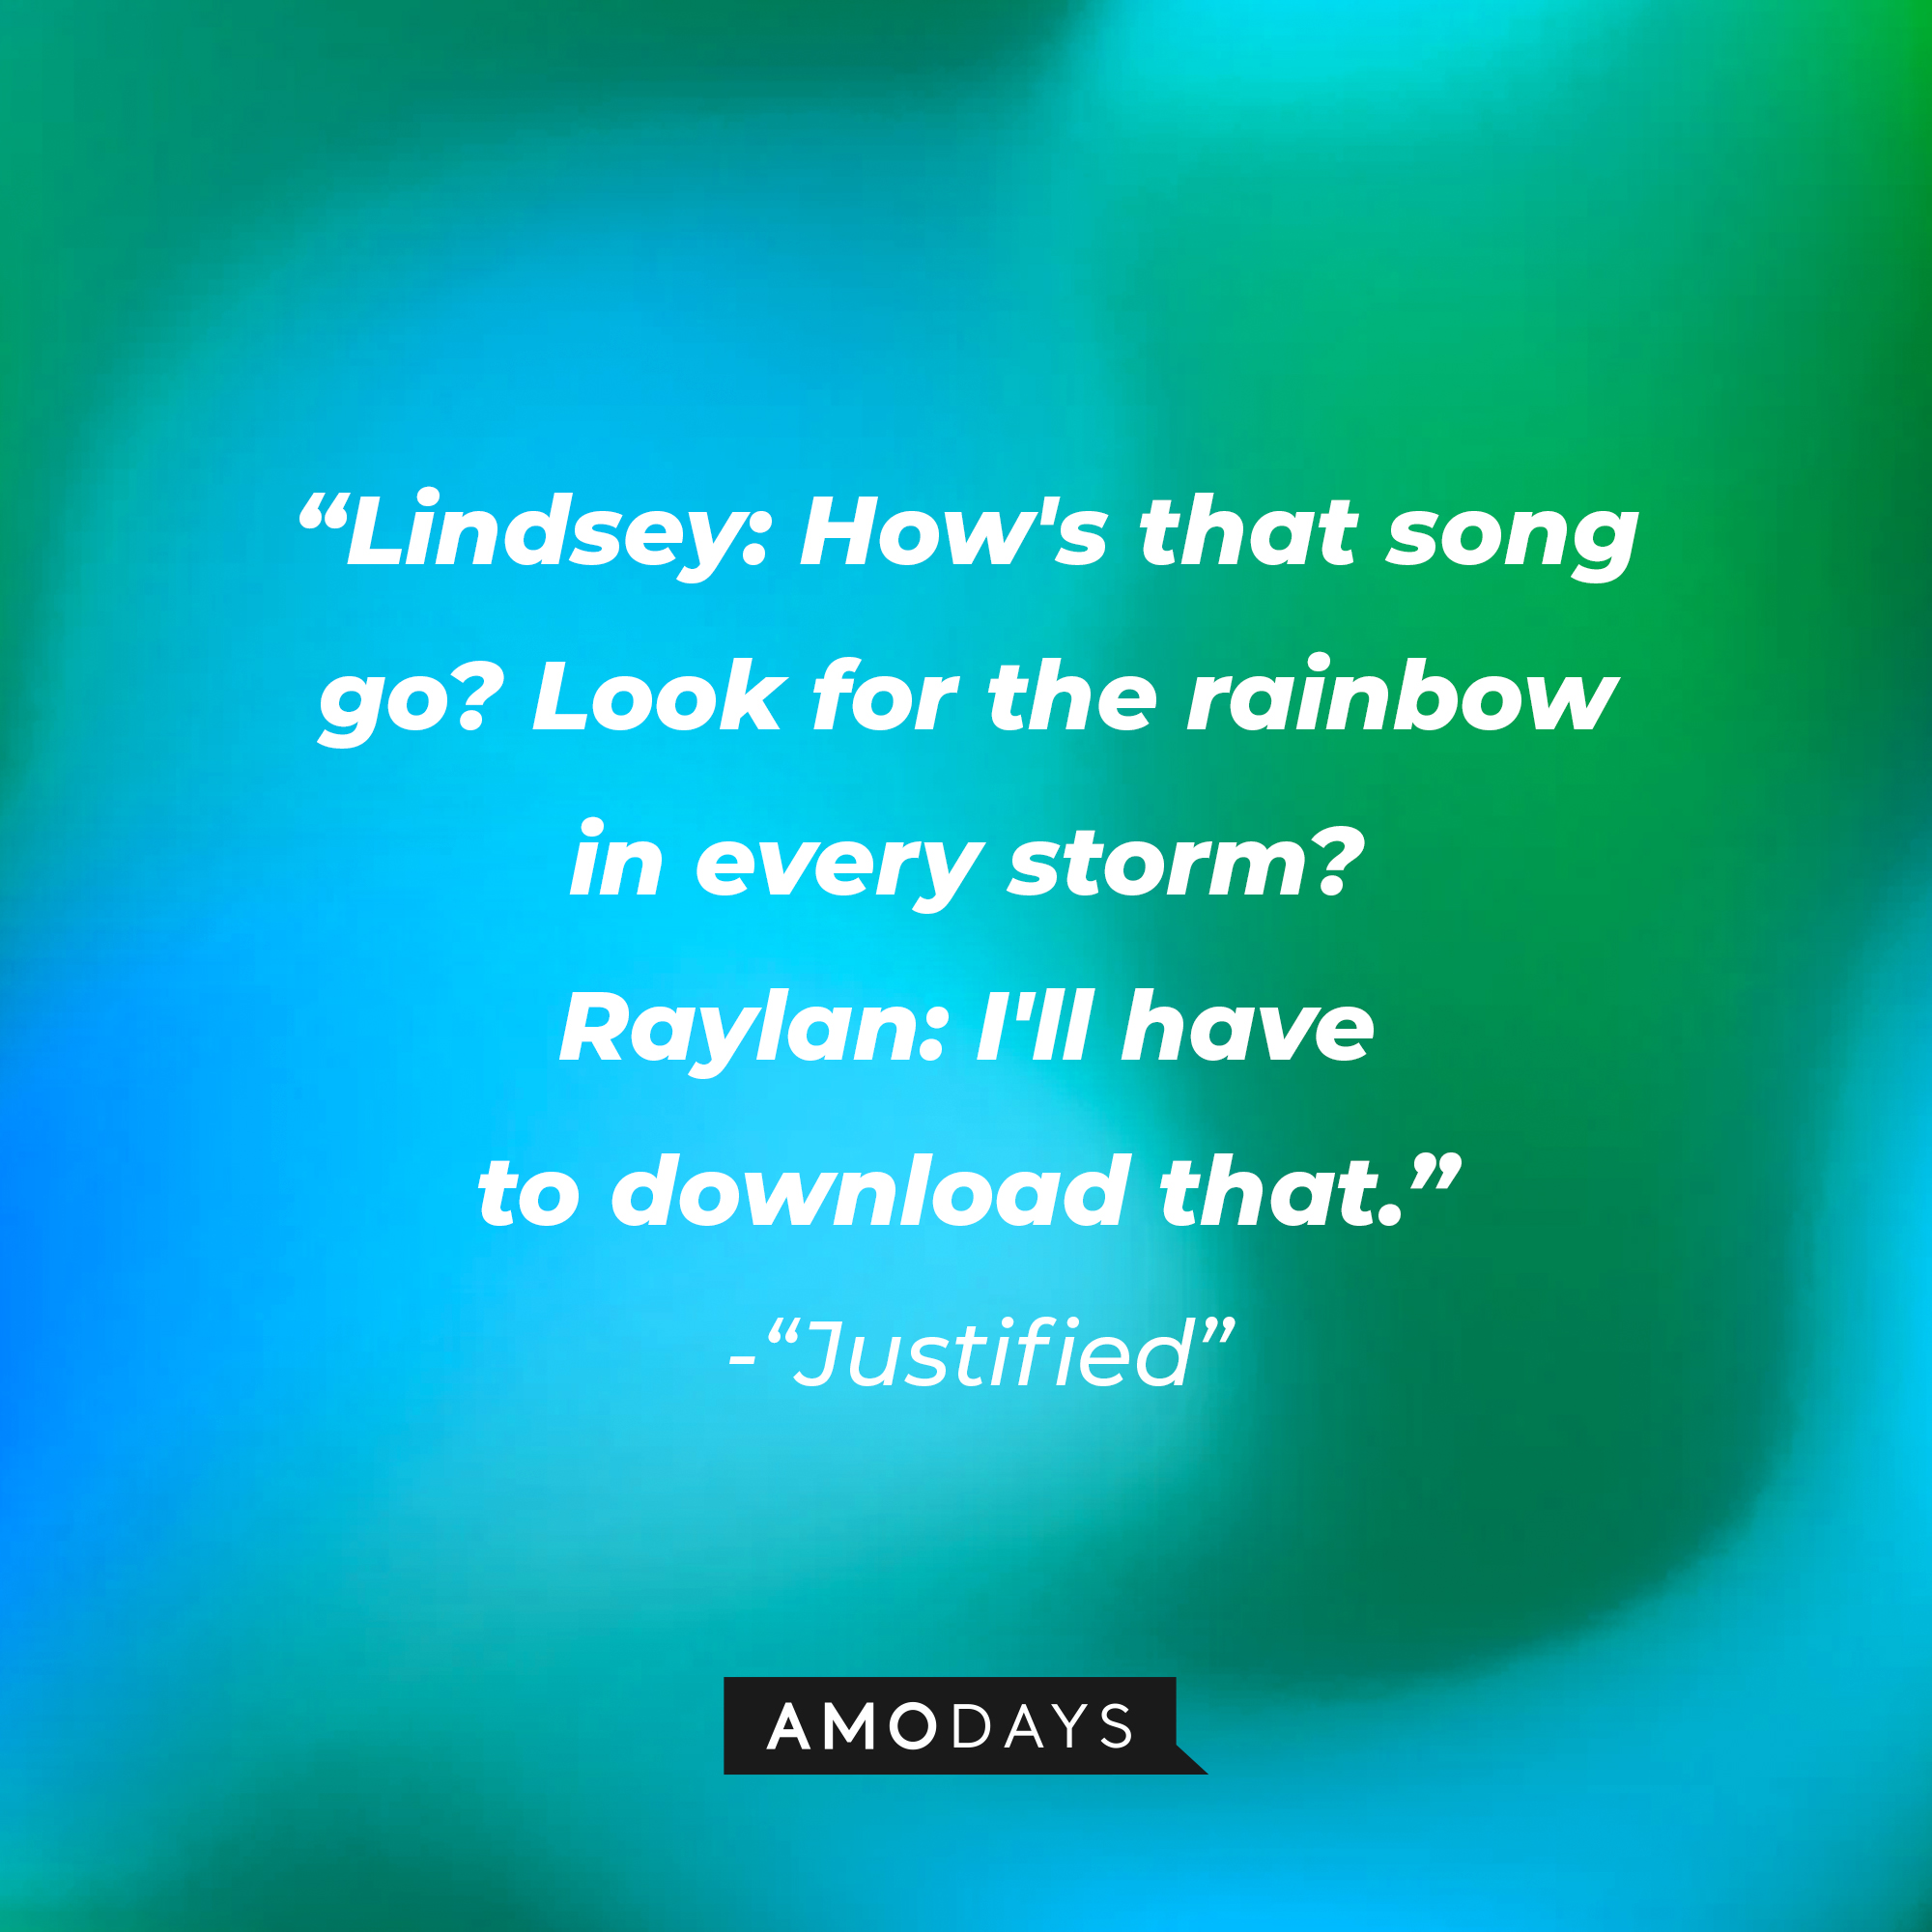 Quote from “Justified”: “Lindsey: How's that song go? Look for the rainbow in every storm? Raylan: I'll have to download that.” | Source: AmoDays